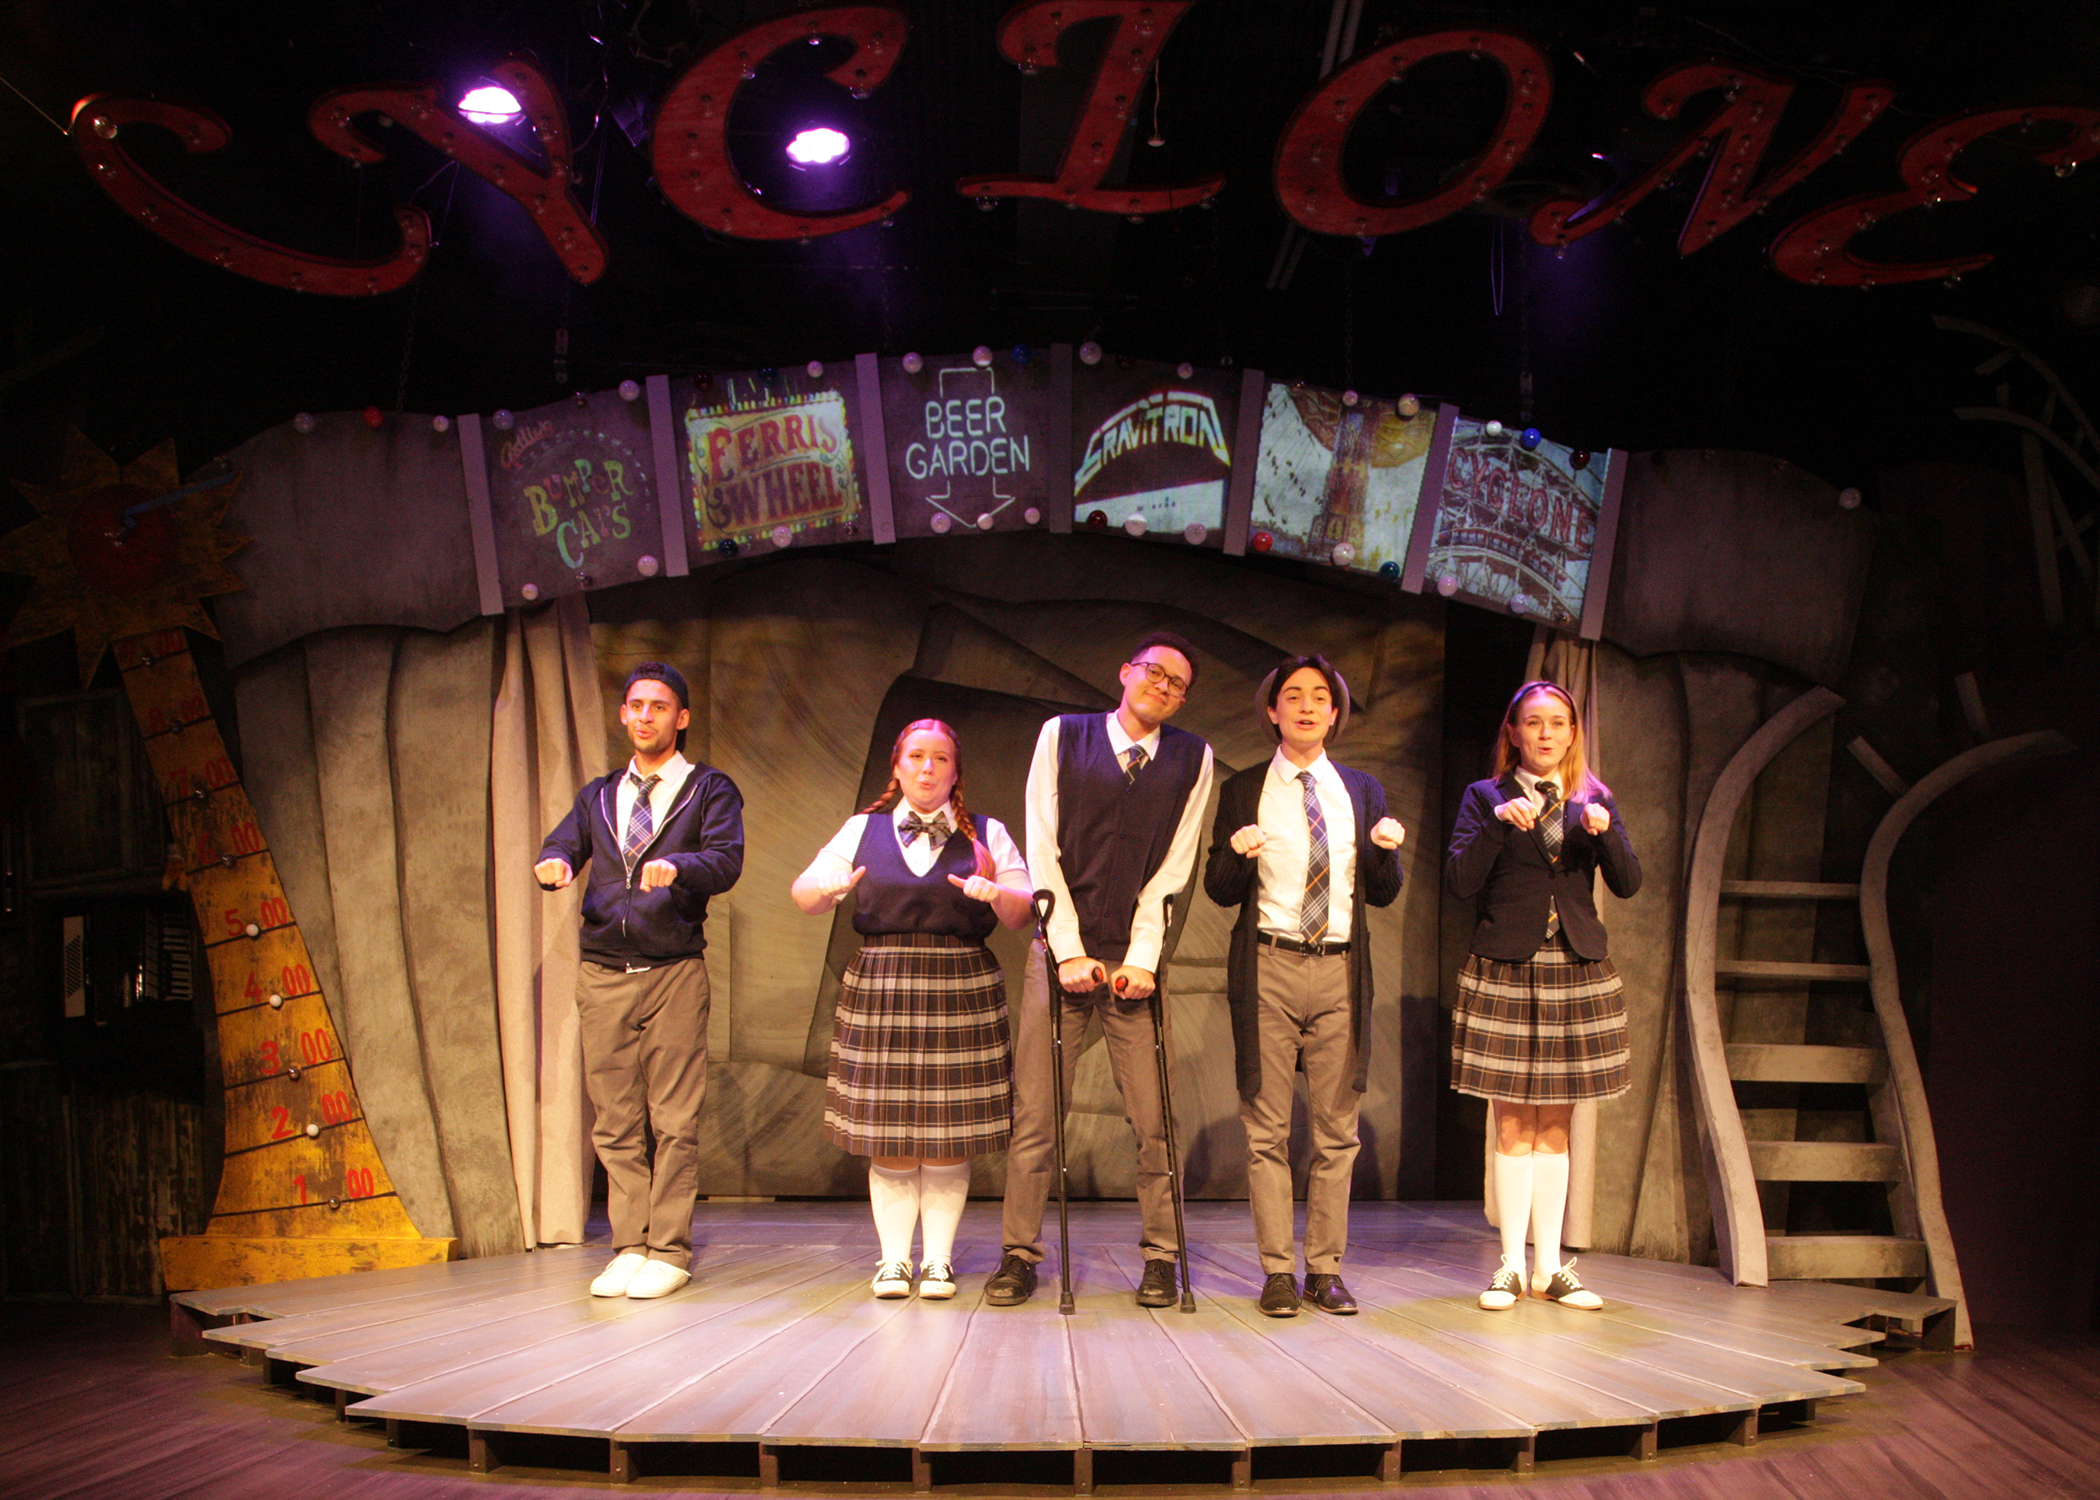 Jared Machado as Mischa Bachinski, Rose Prell as Constance Blackwood, Jaylen Baham as Ricky Potts, Wyatt Hatfield as Noel Gruber, and Haley Wolff as Ocean O'Connell Rosenberg in Chance Theater's California premiere production of 